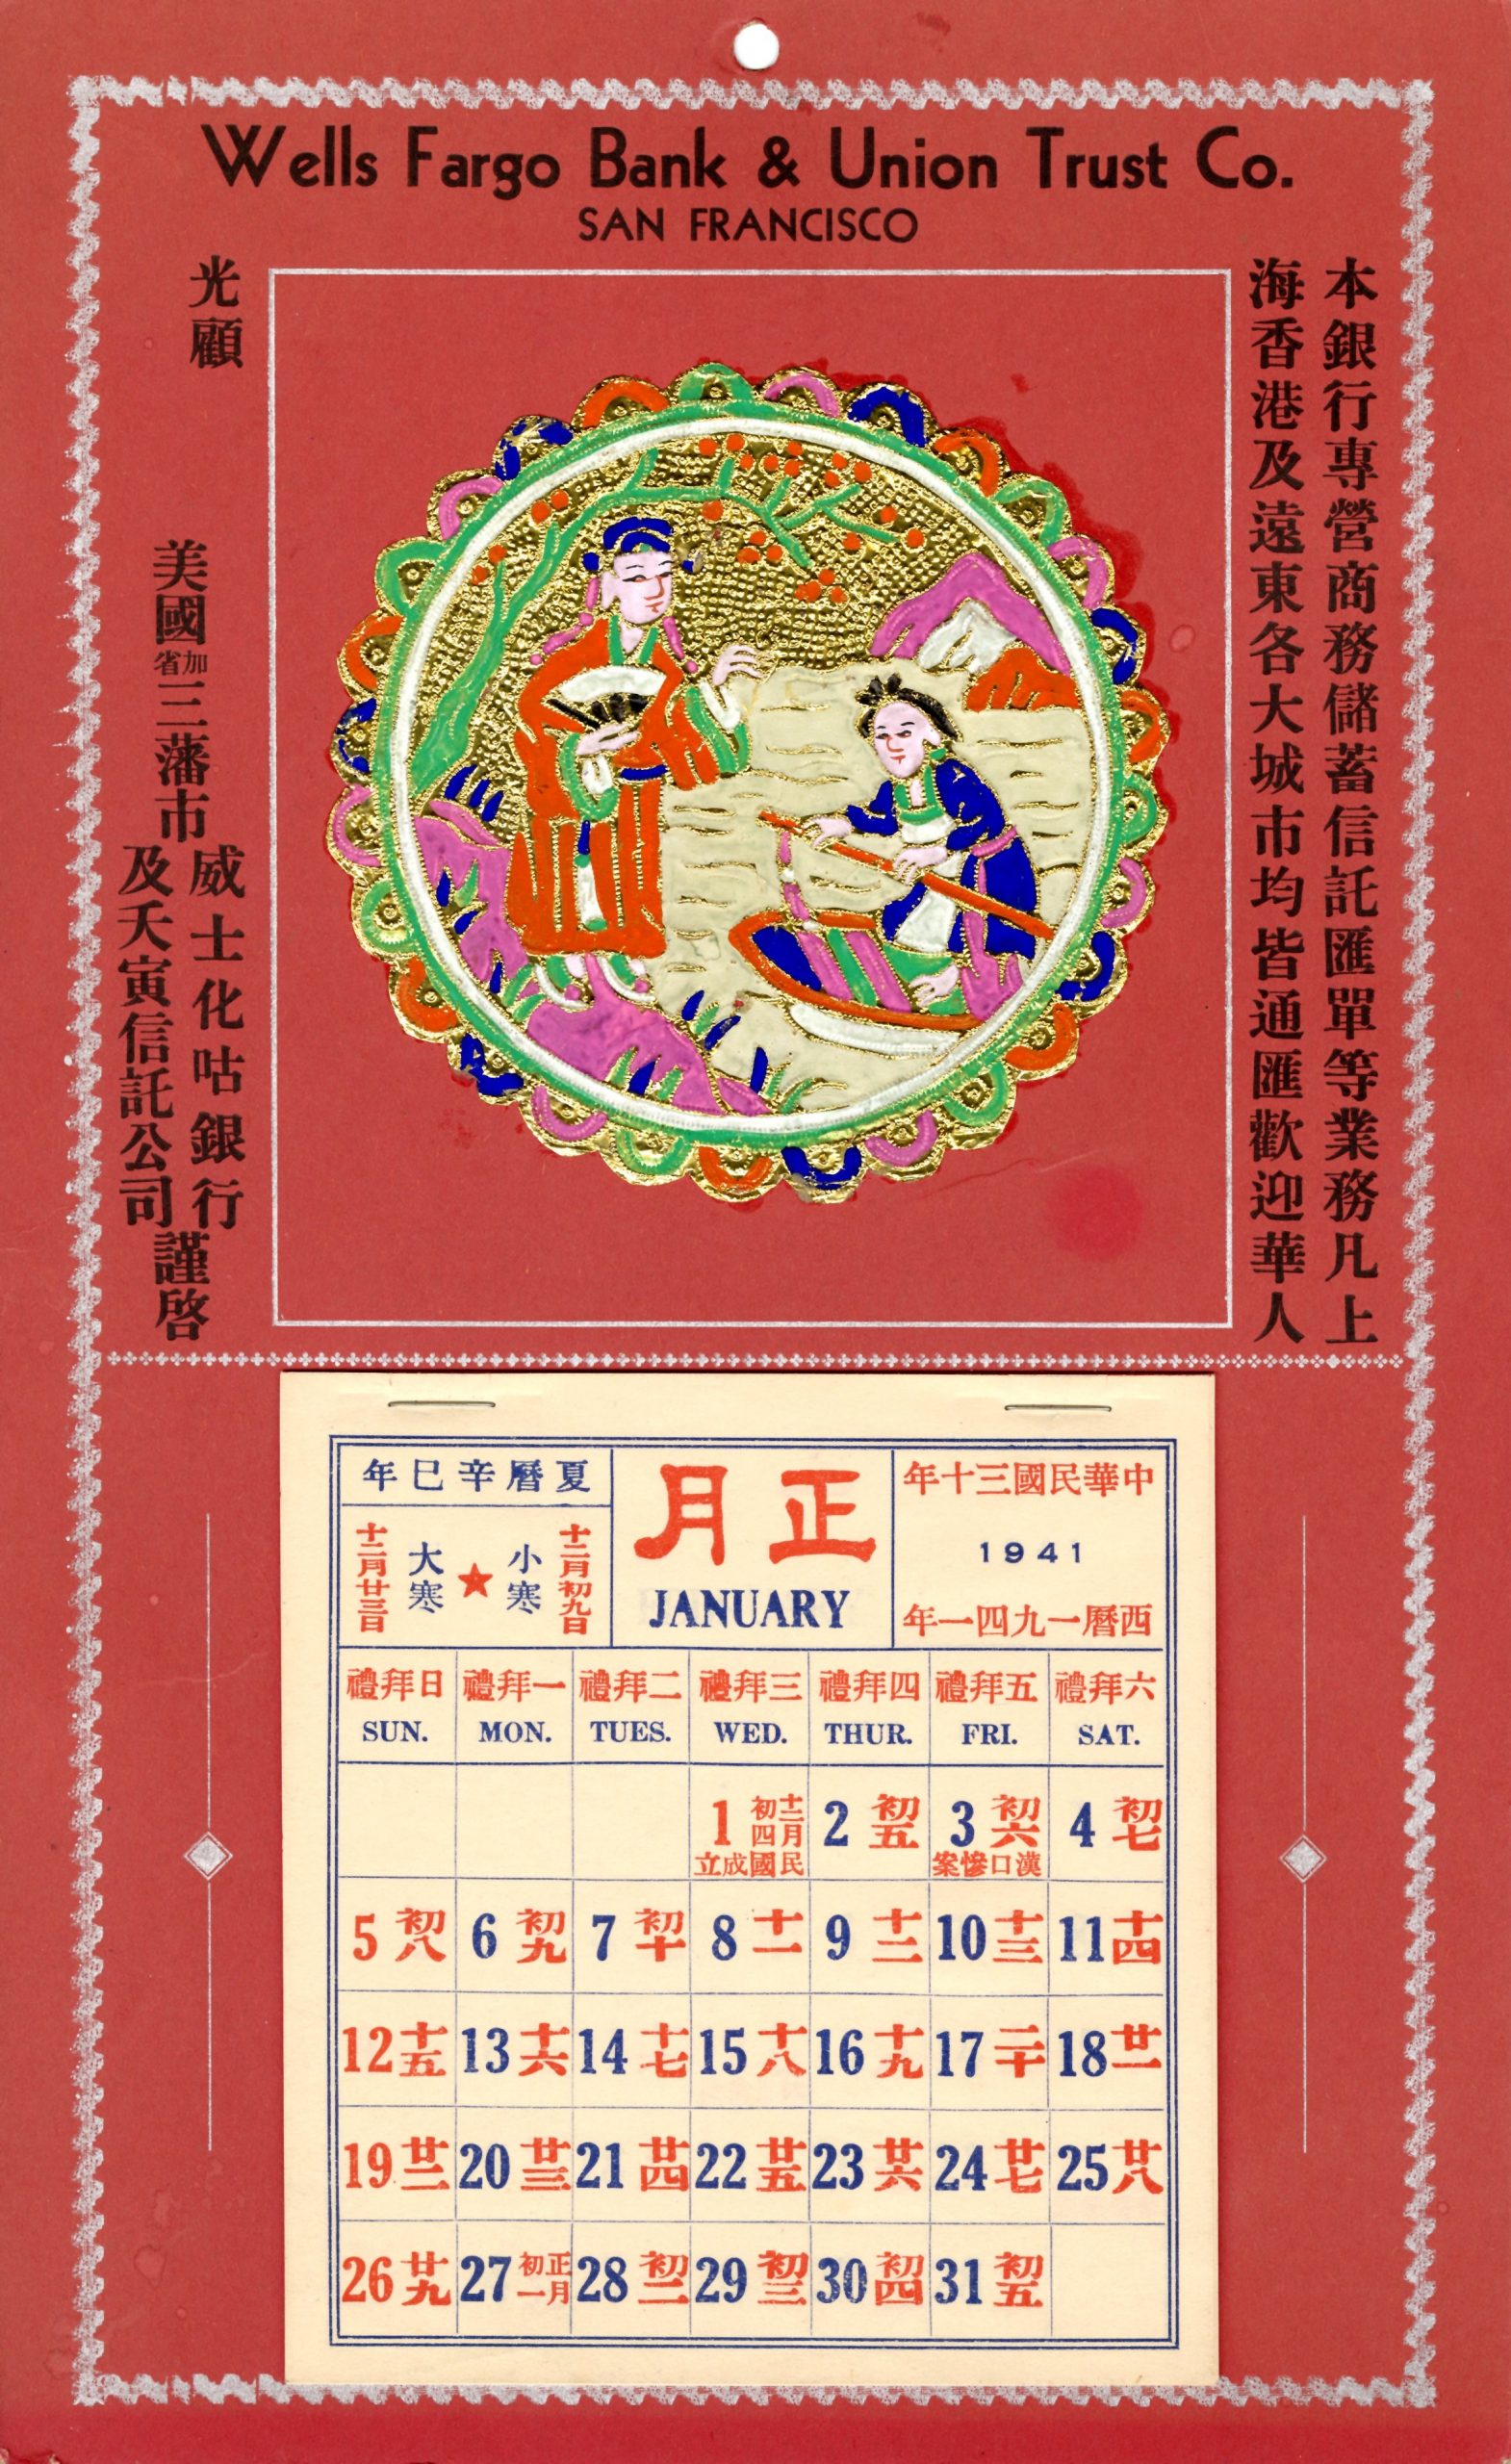 Calendar dated 1941. Colorful illustration with gold embellishments of two people meeting at a river bank. Calendar has solar dates marked in numeric print and lunar days marked in red.